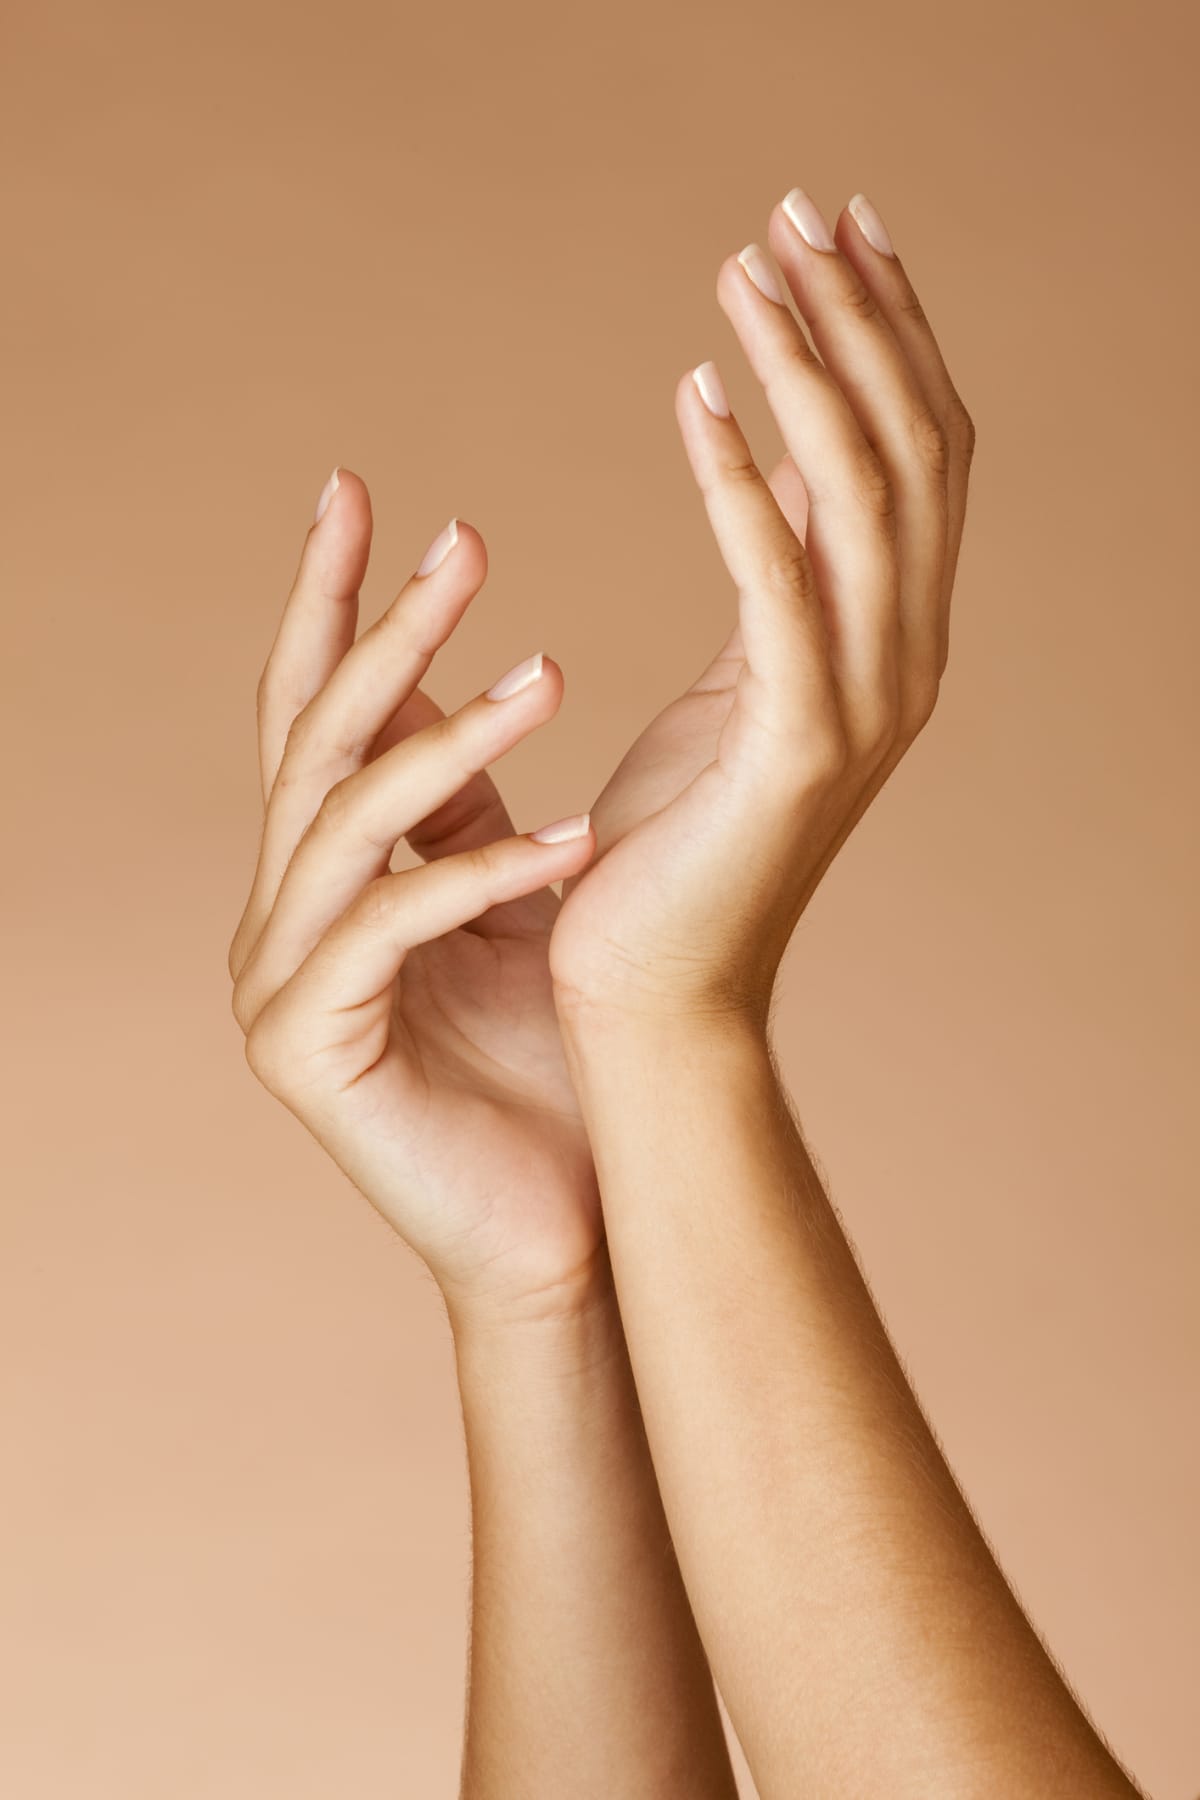 Close up of two hands with healthy nails against a tan background